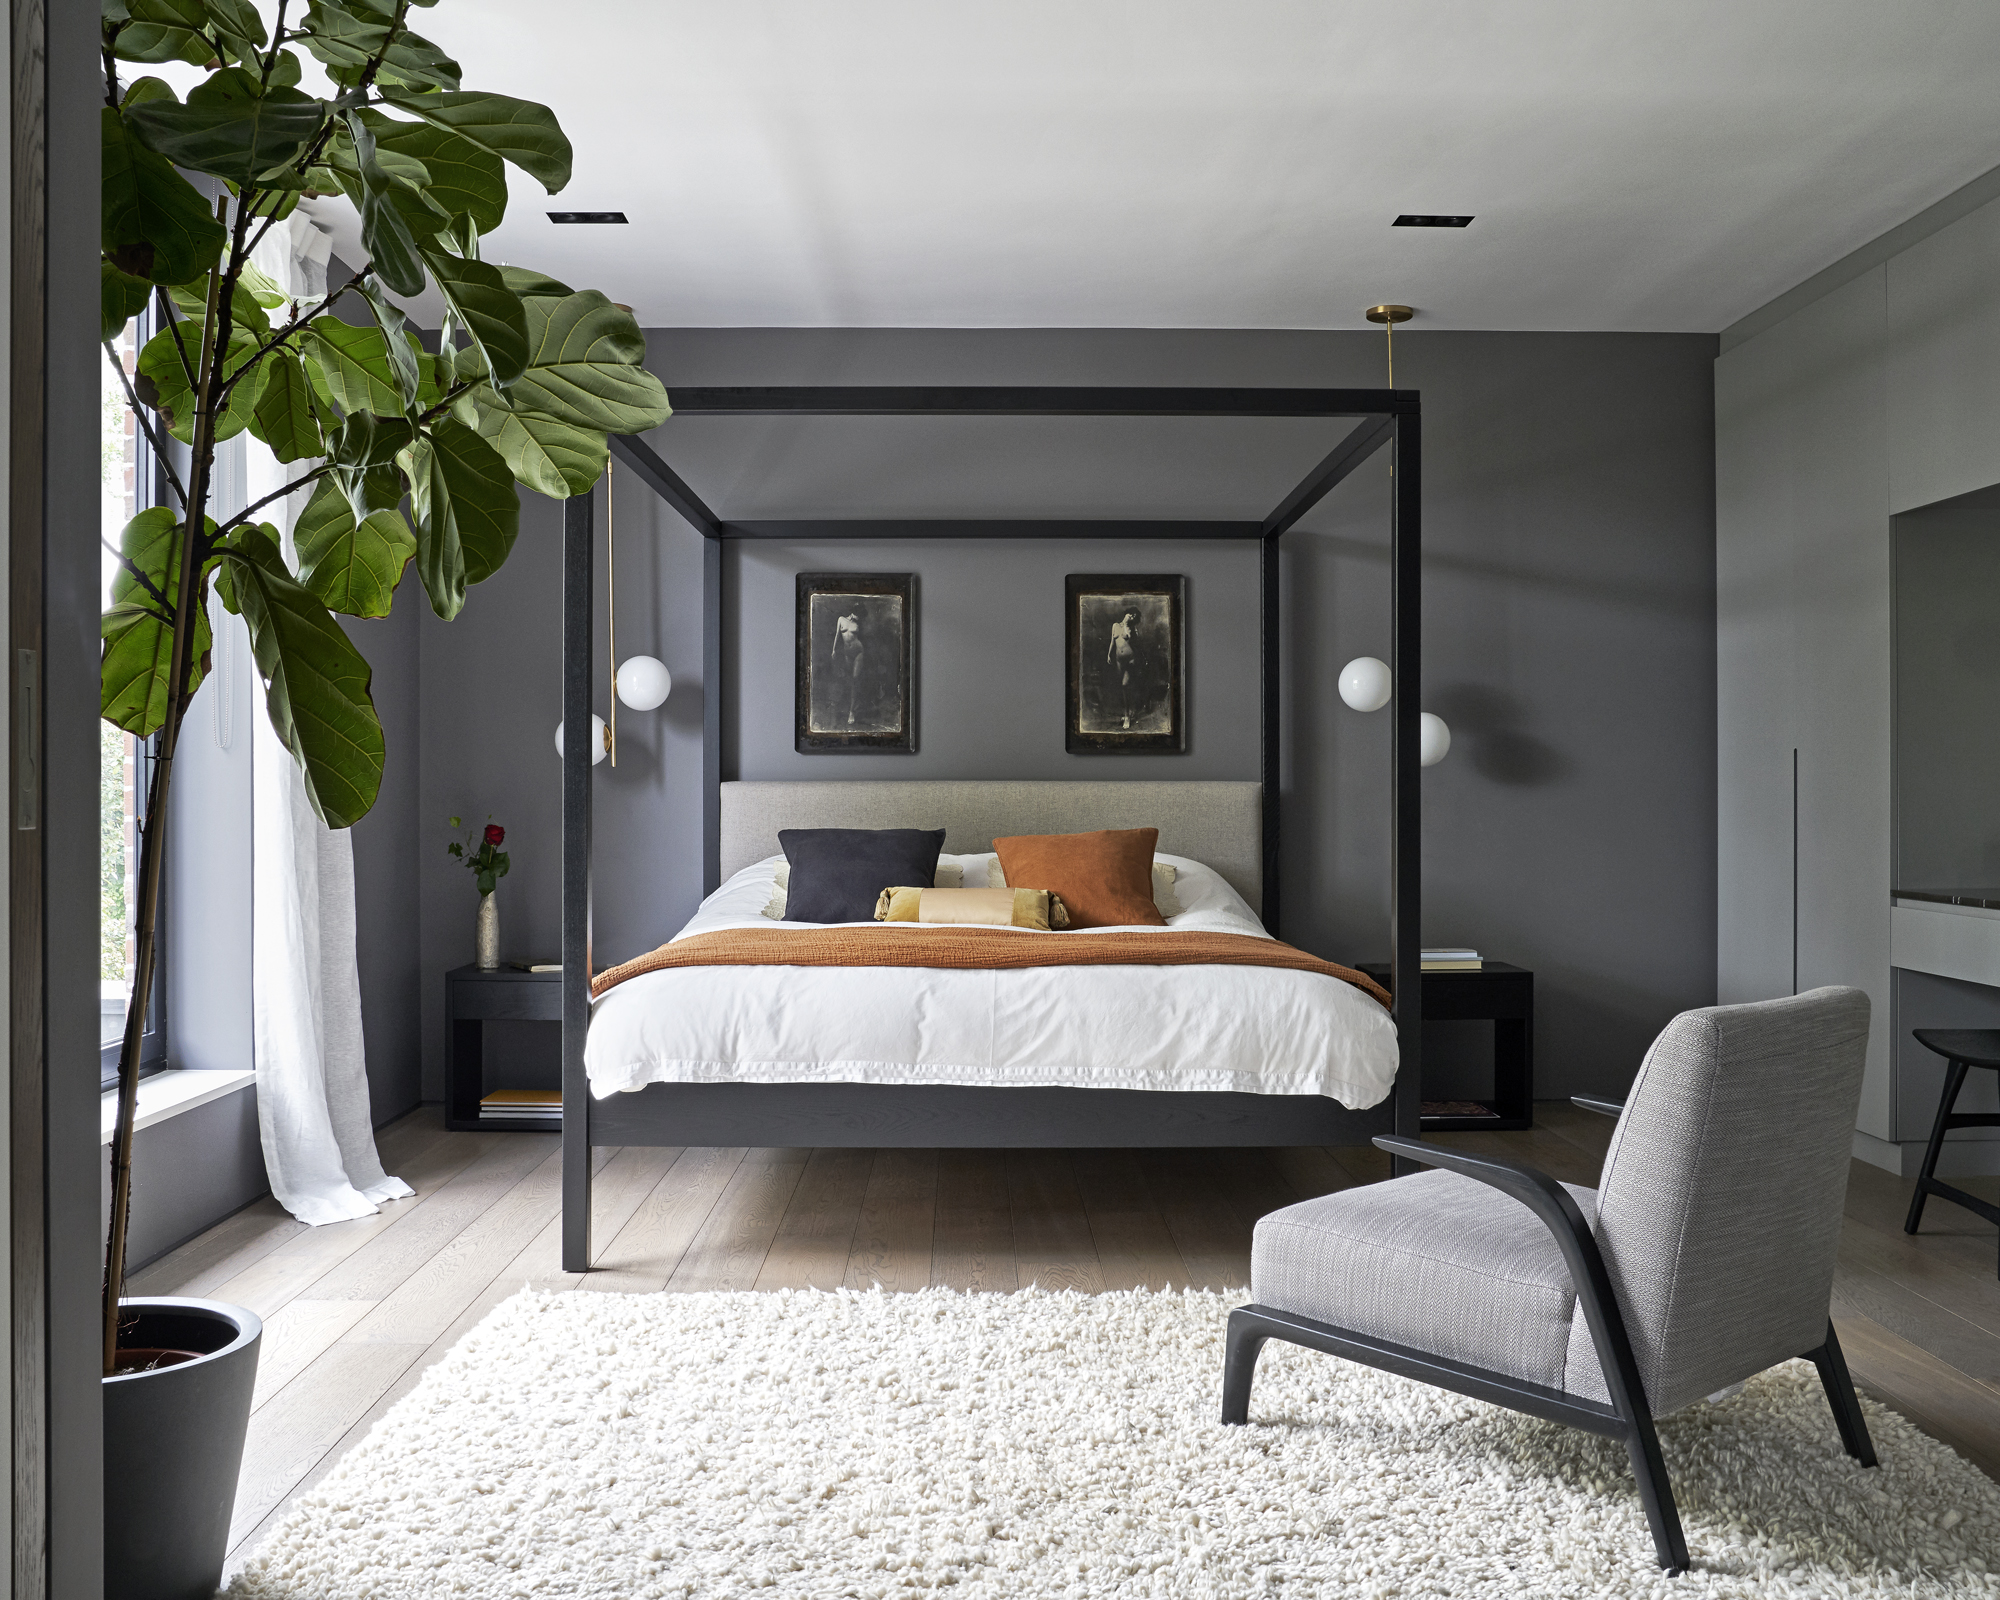 A bedroom with dark gray walls and a black, contemporary four poster bed demonstrating simple bedroom ideas.